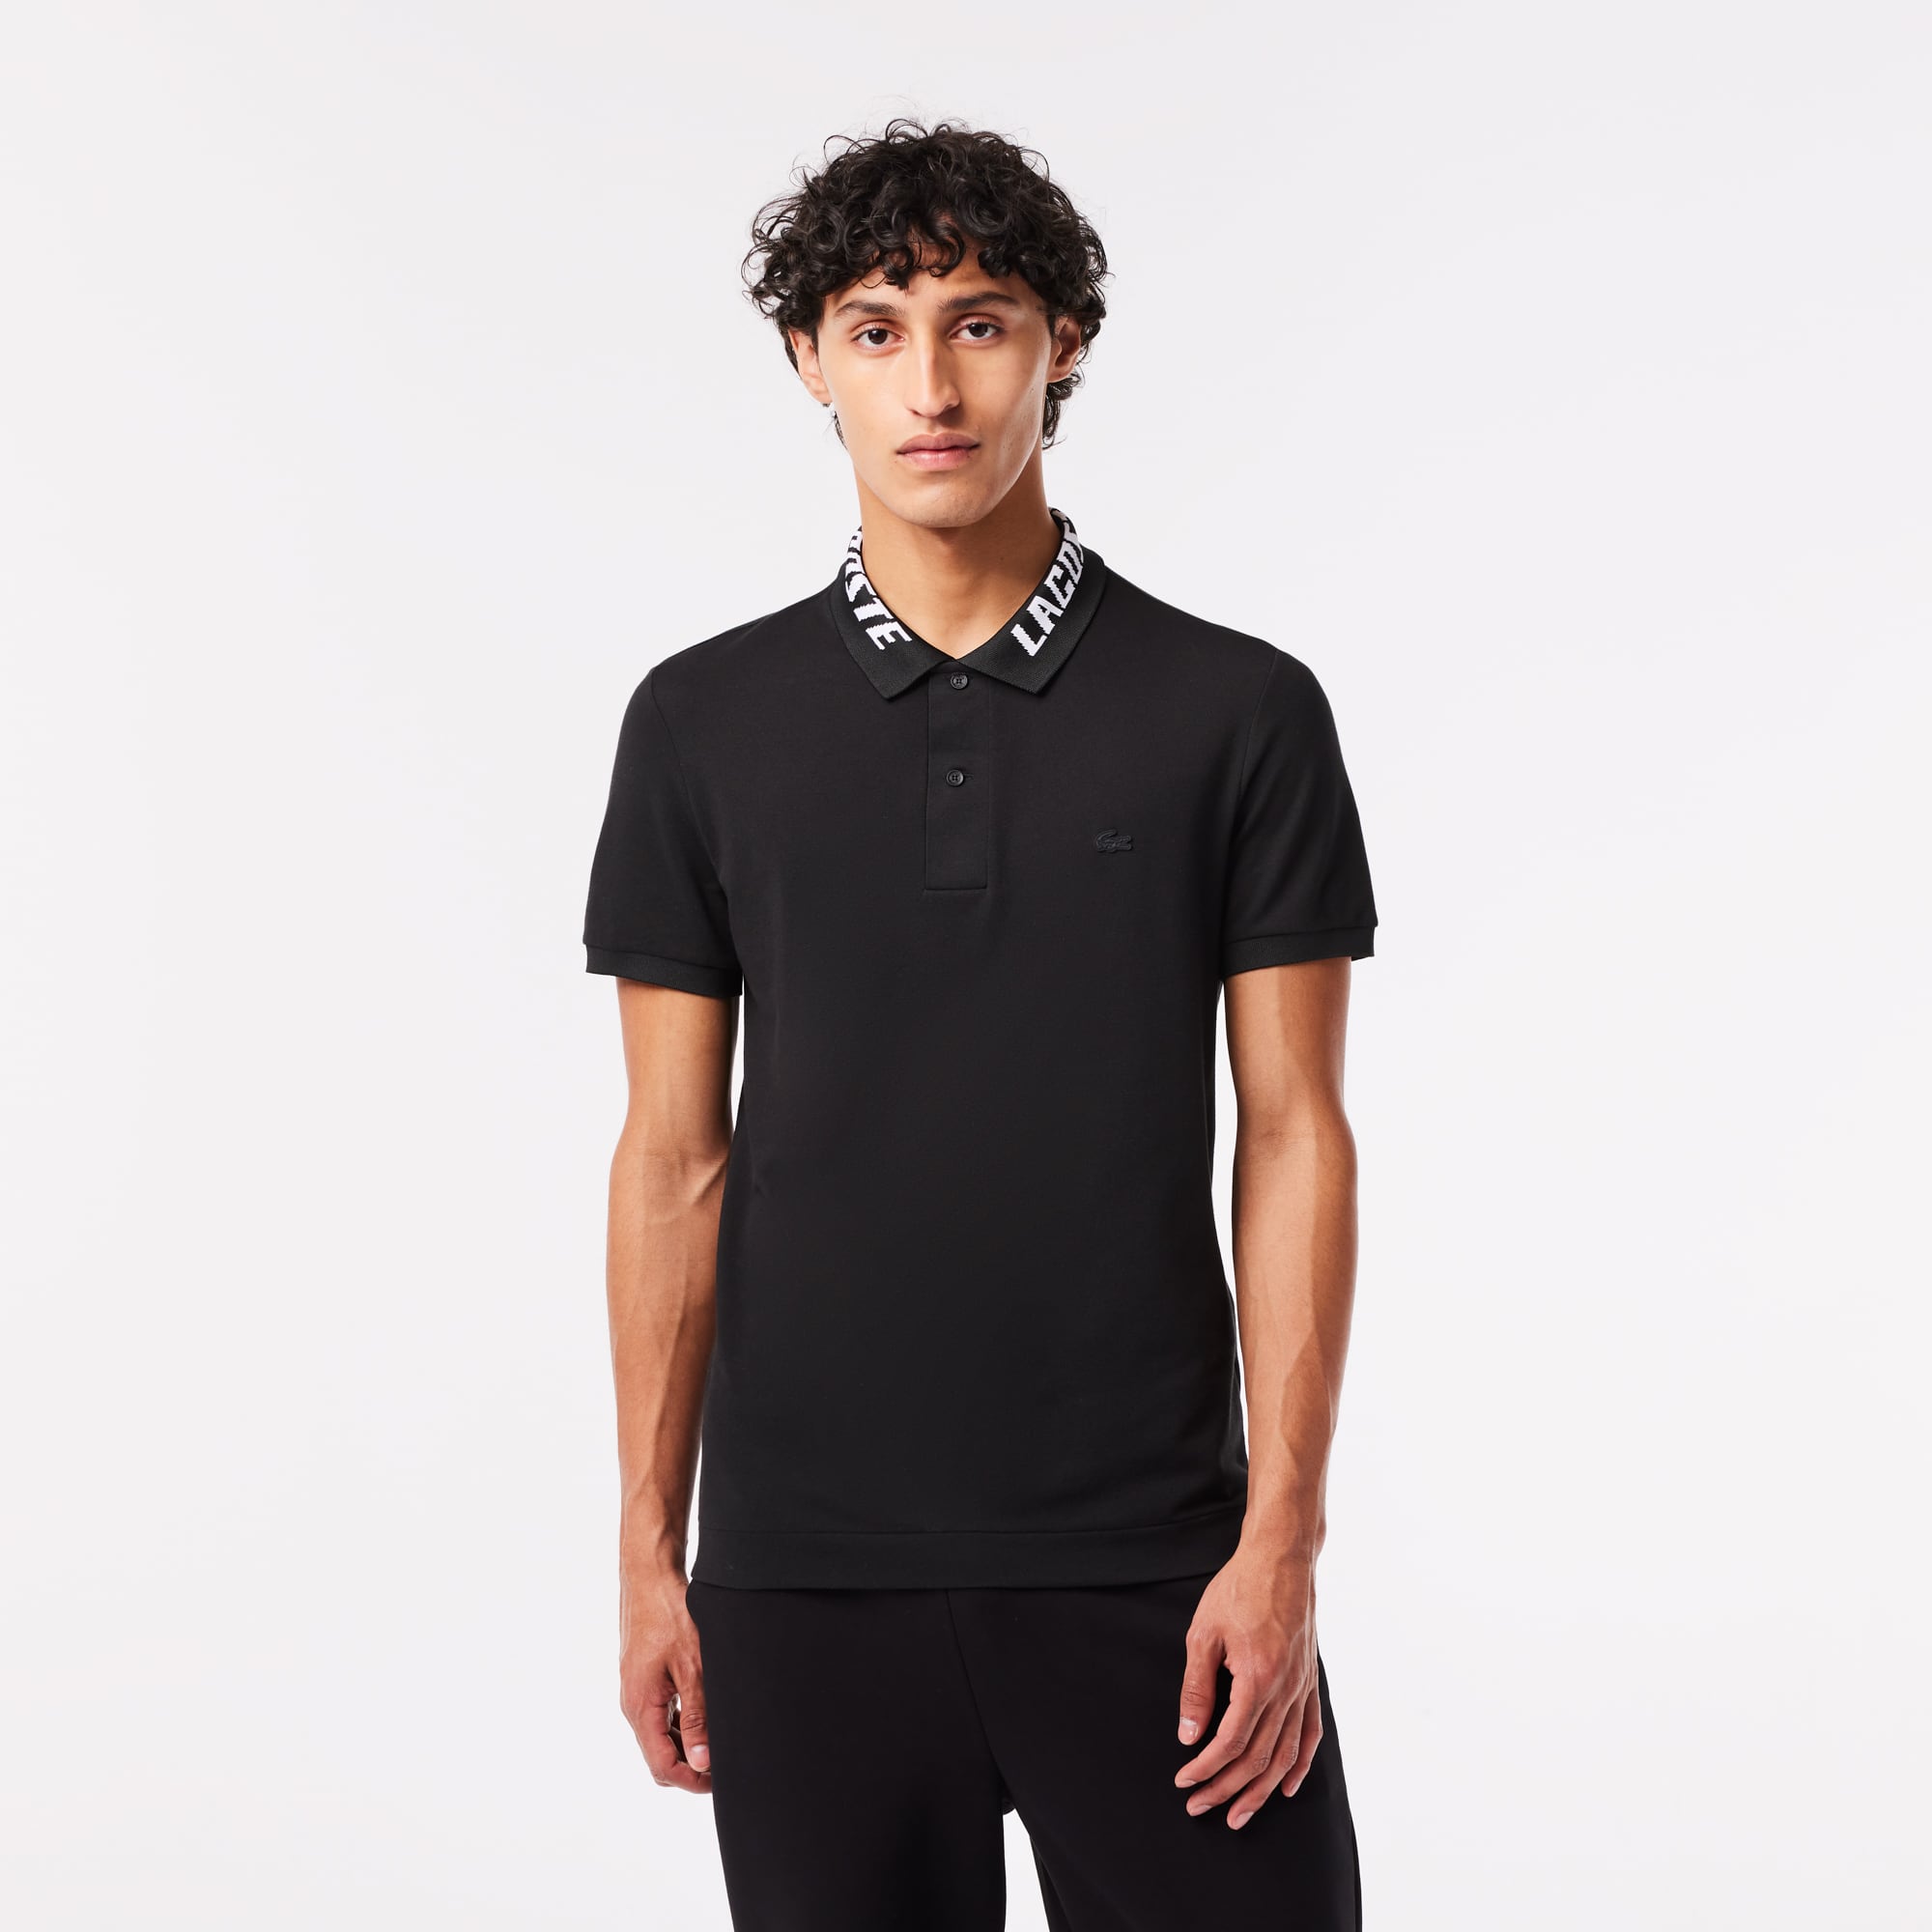 Lacoste Mens Branded Slim Fit Stretch Pique Polo